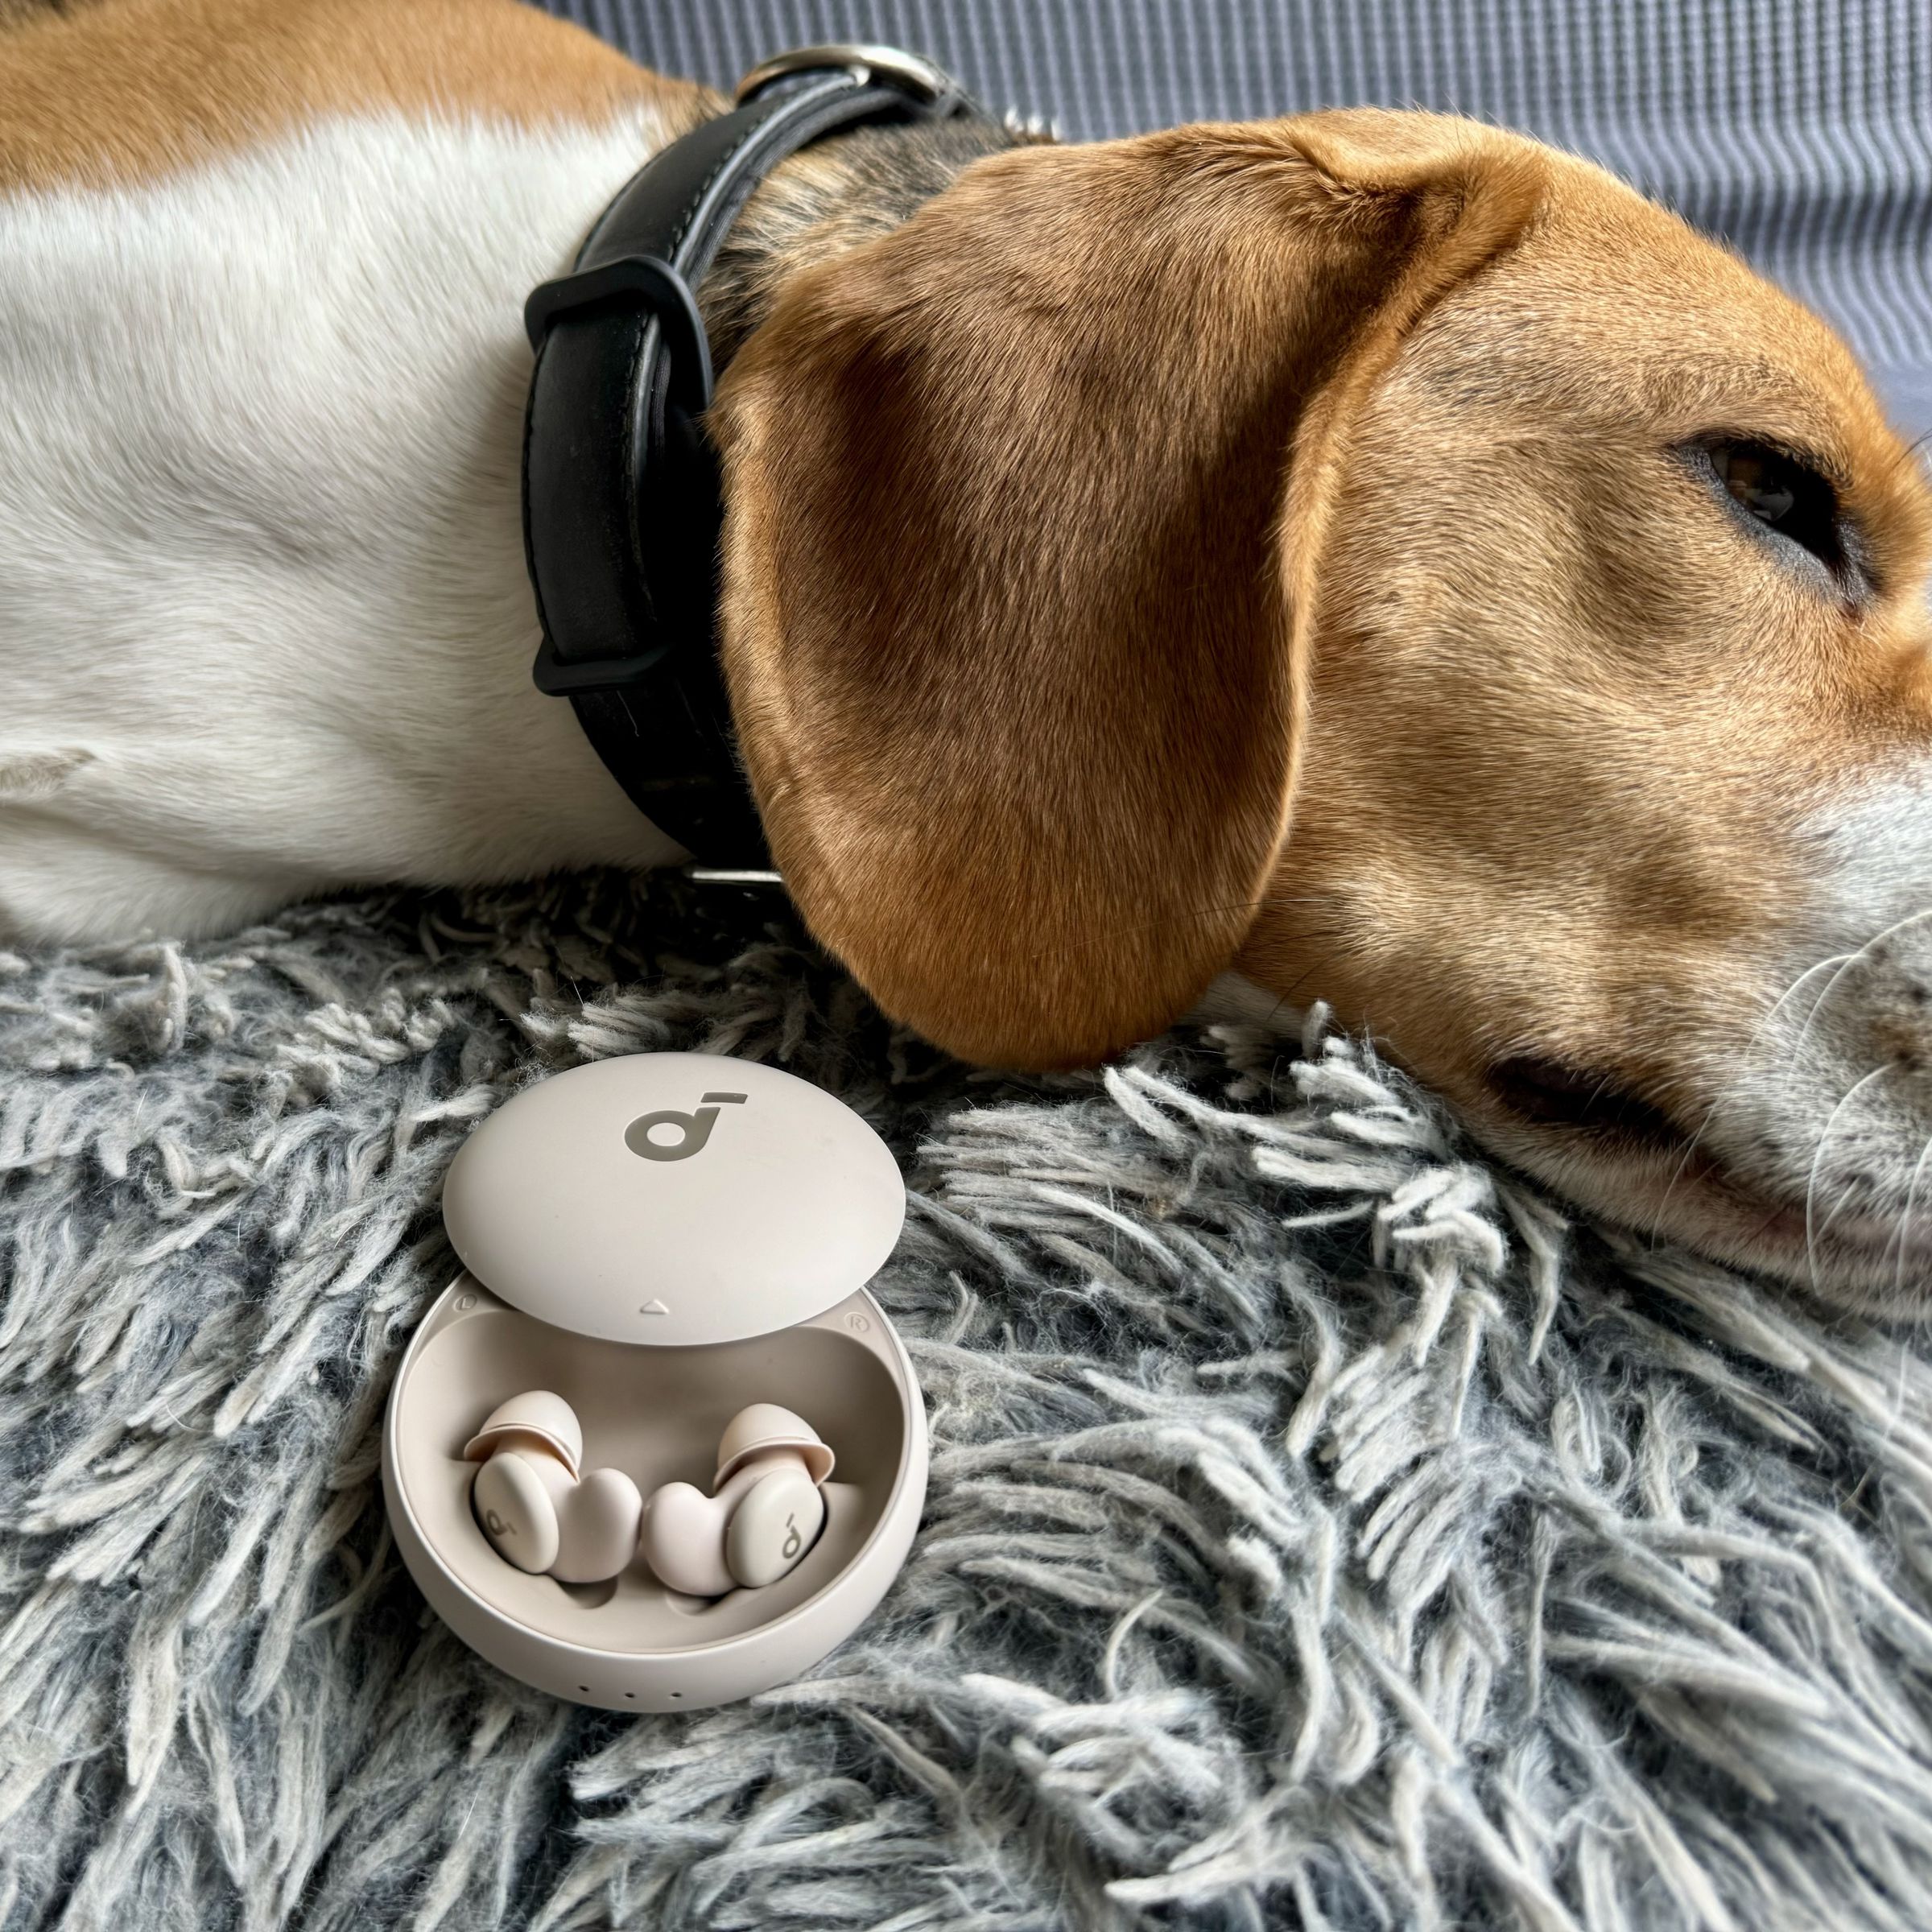 A beagle lies on its plush sleep mat with the Soundcore Sleep A20 earbuds shown in their case in the foreground.